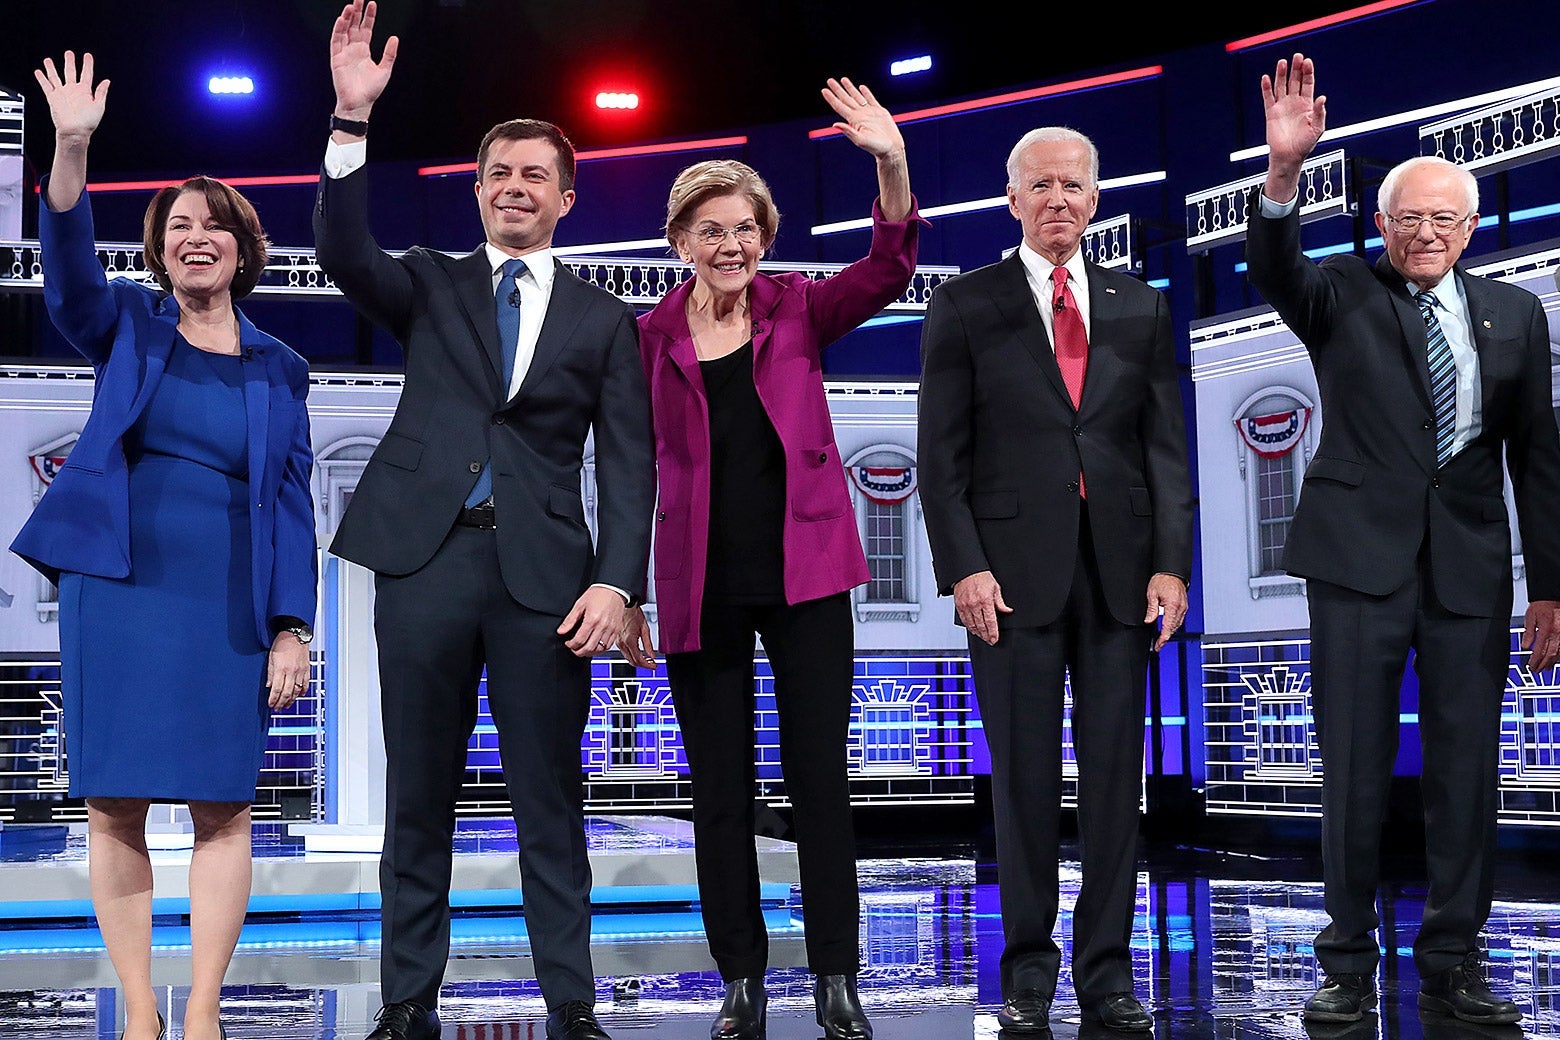 Democratic candidates are delusional about the Supreme Court